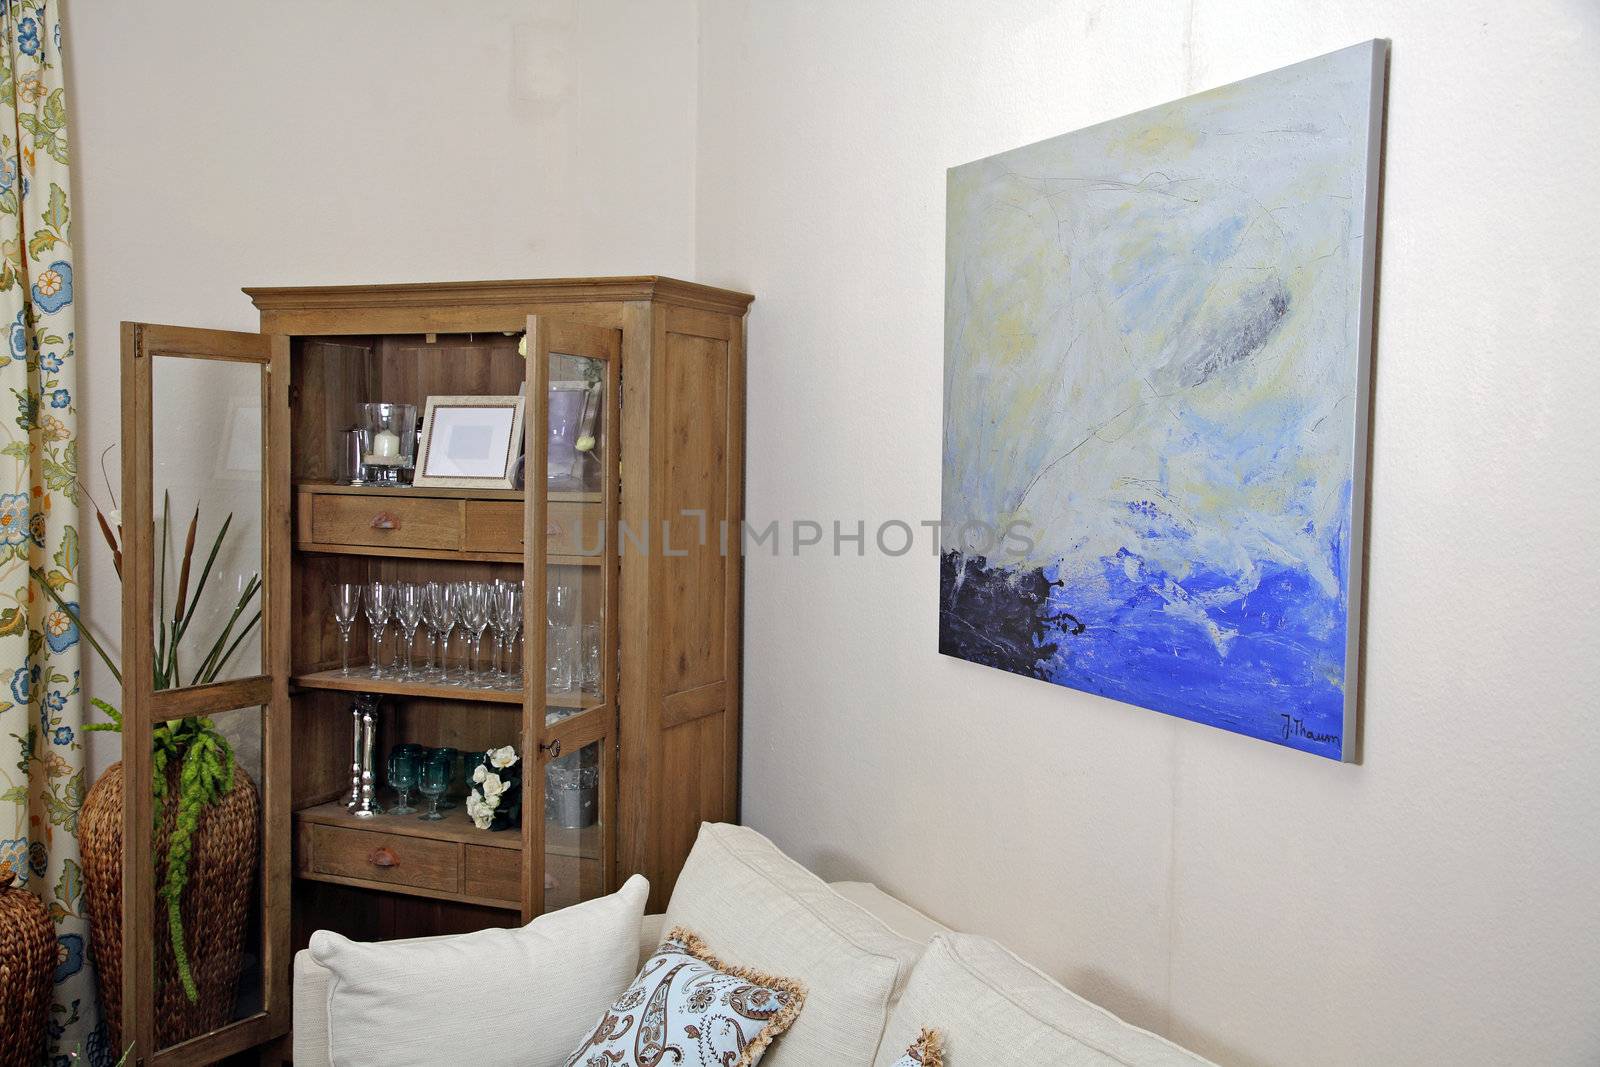 A living room with a couch, a cupboard, and a painting on the wall
